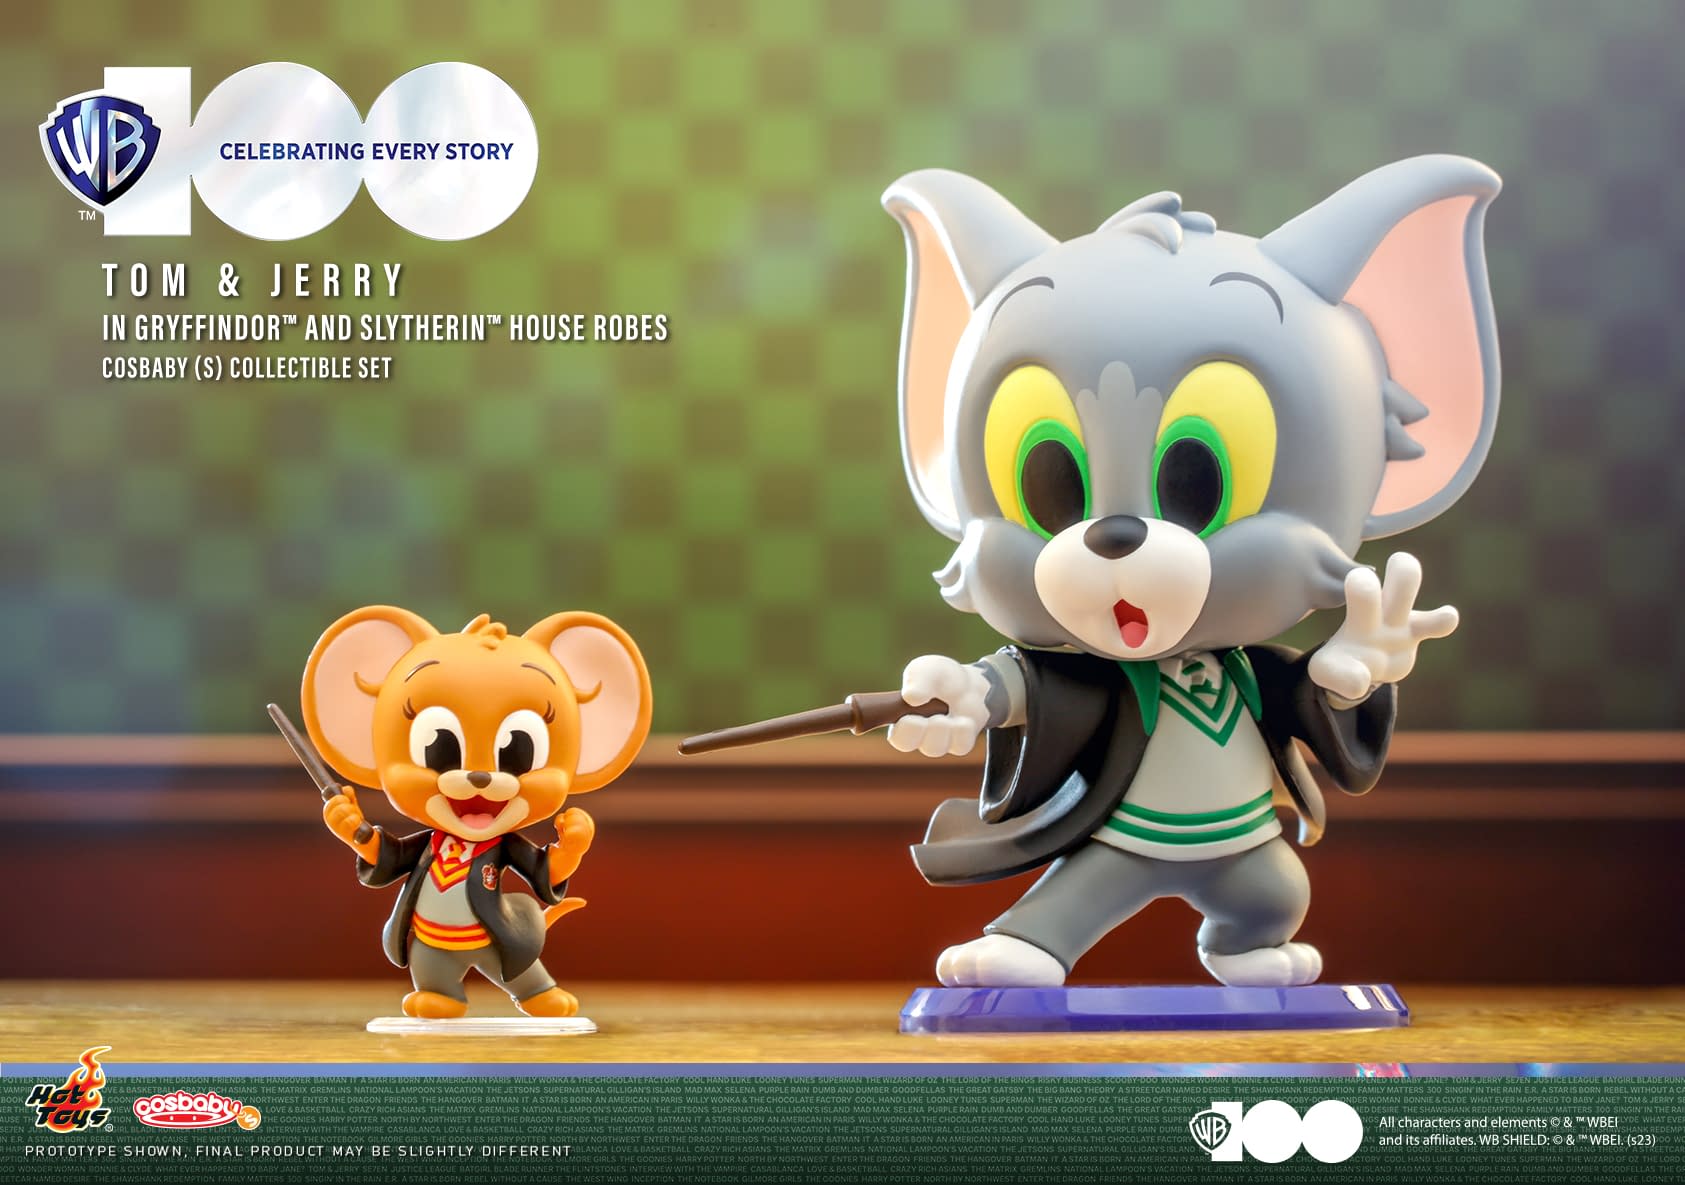 Hot Toys Celebrates WB100 with Some Fun Tom &#038; Jerry Crossovers